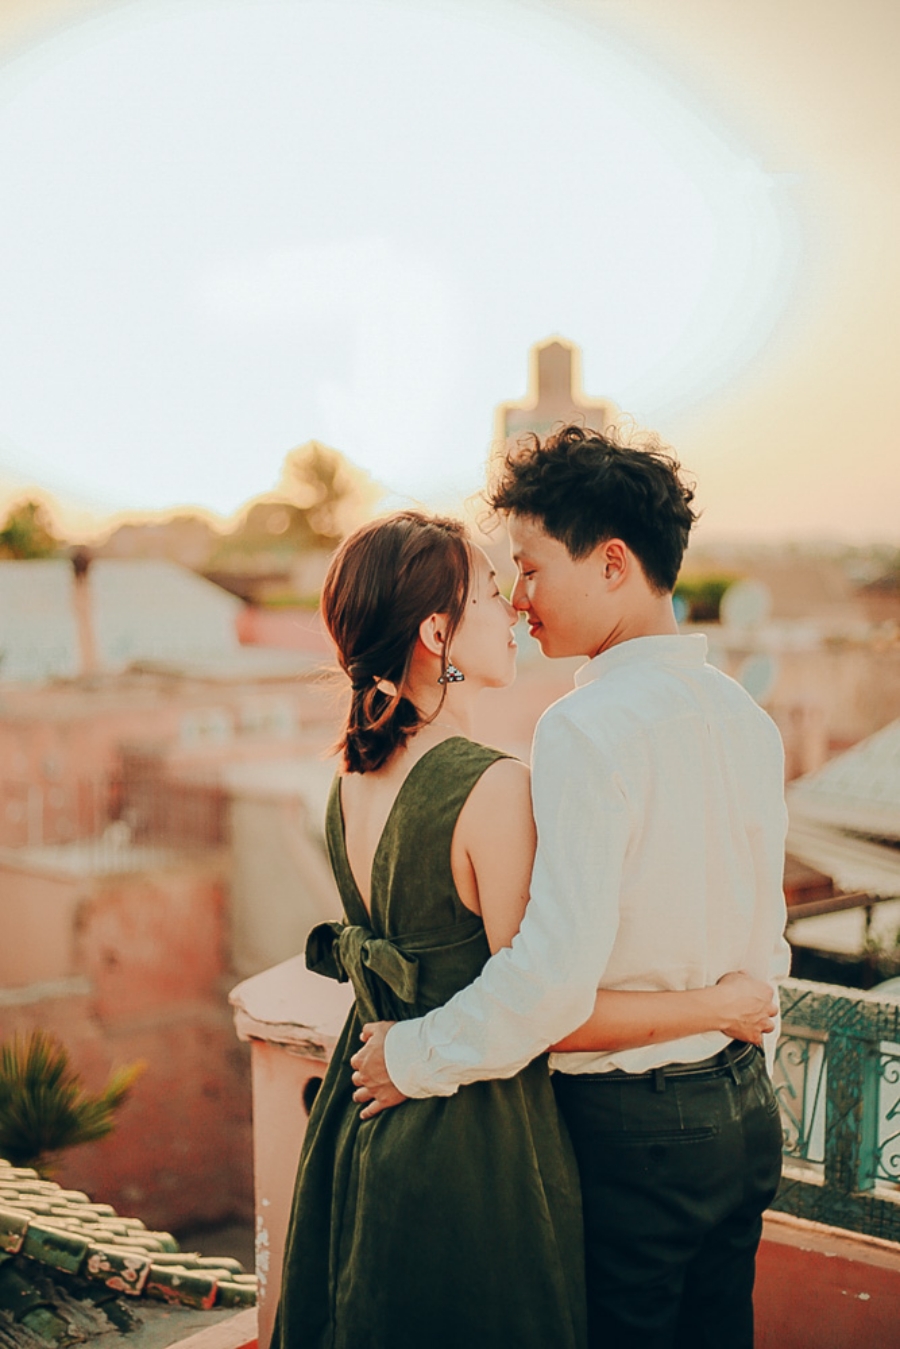 Morocco Pre-Wedding Photoshoot At Marrakech - Le Jardin Secret And Djemma El Fna Tower by Rich on OneThreeOneFour 20